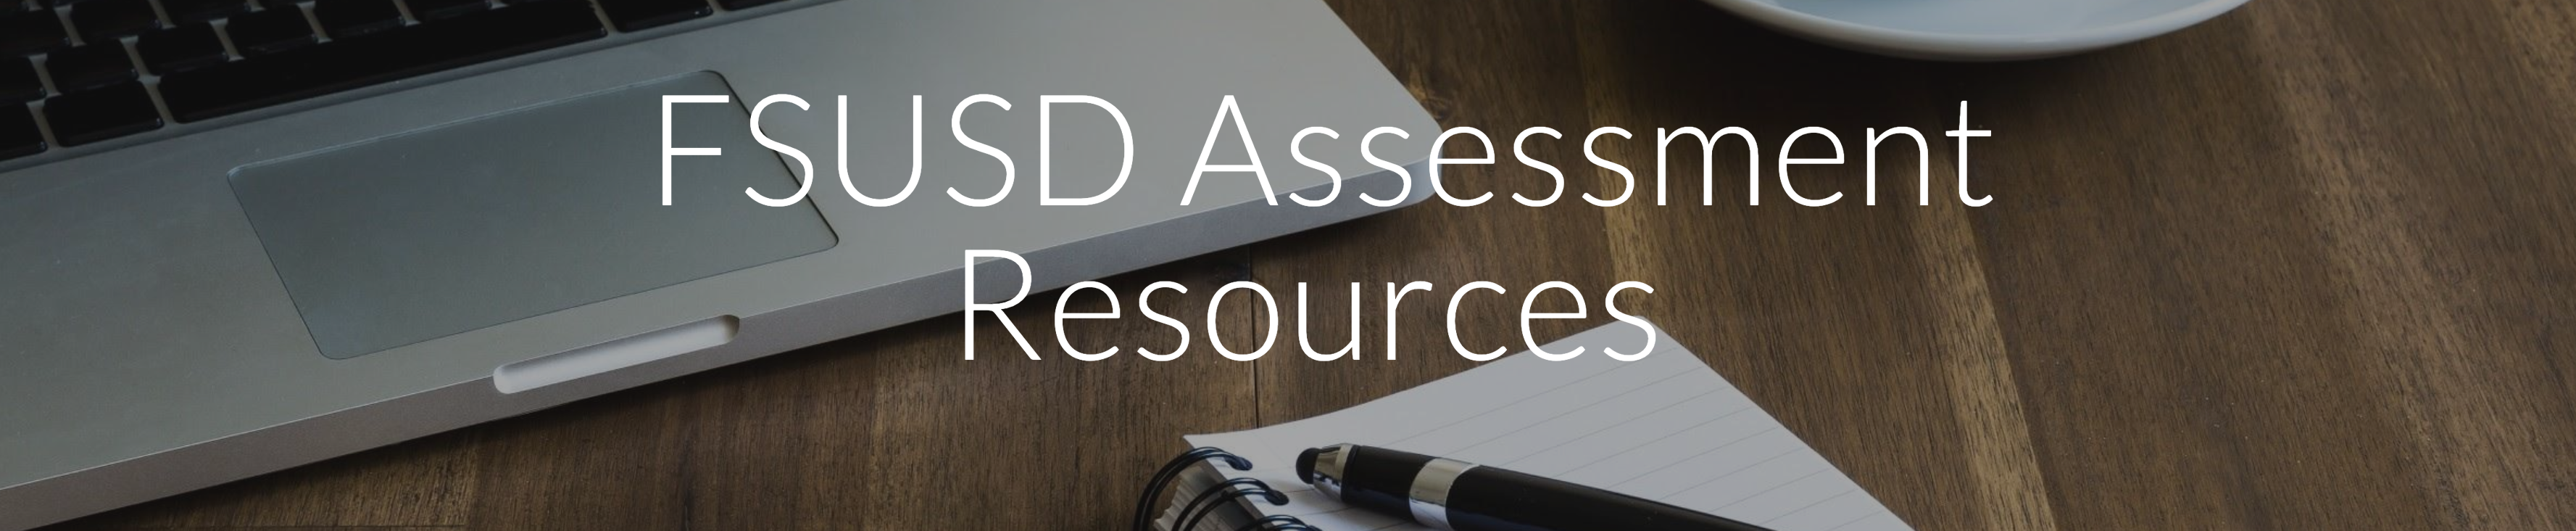 FSUSD Assesment Resources